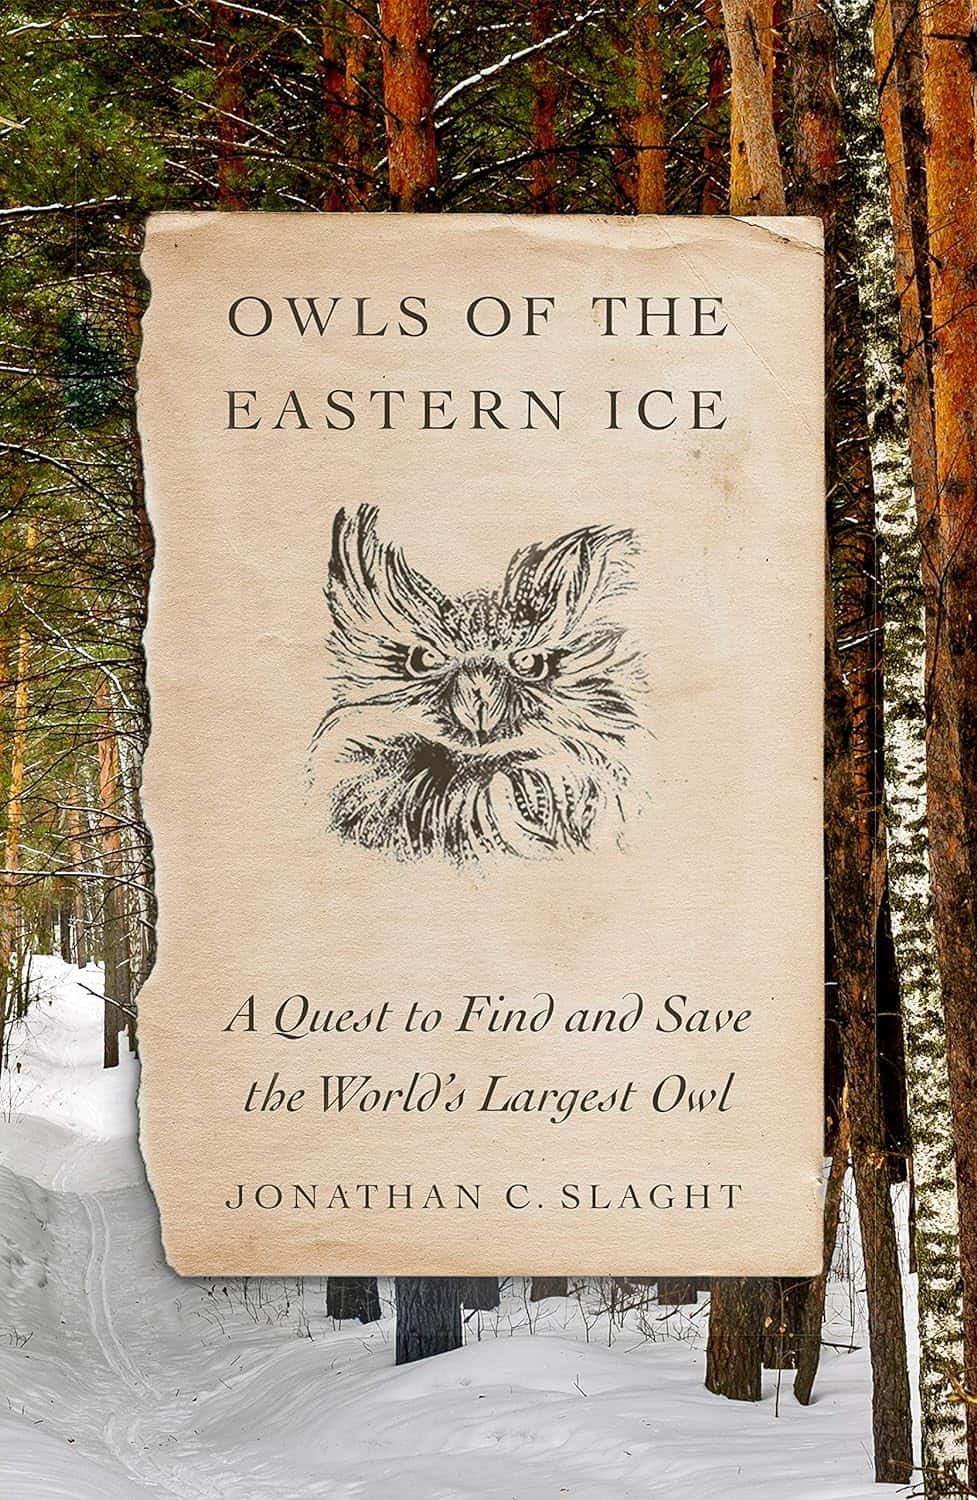 Owls of the Eastern Ice: A Quest to Find and Save the World's Largest OwlOwls of the Eastern Ice: A Quest to Find and Save the World's Largest Owl